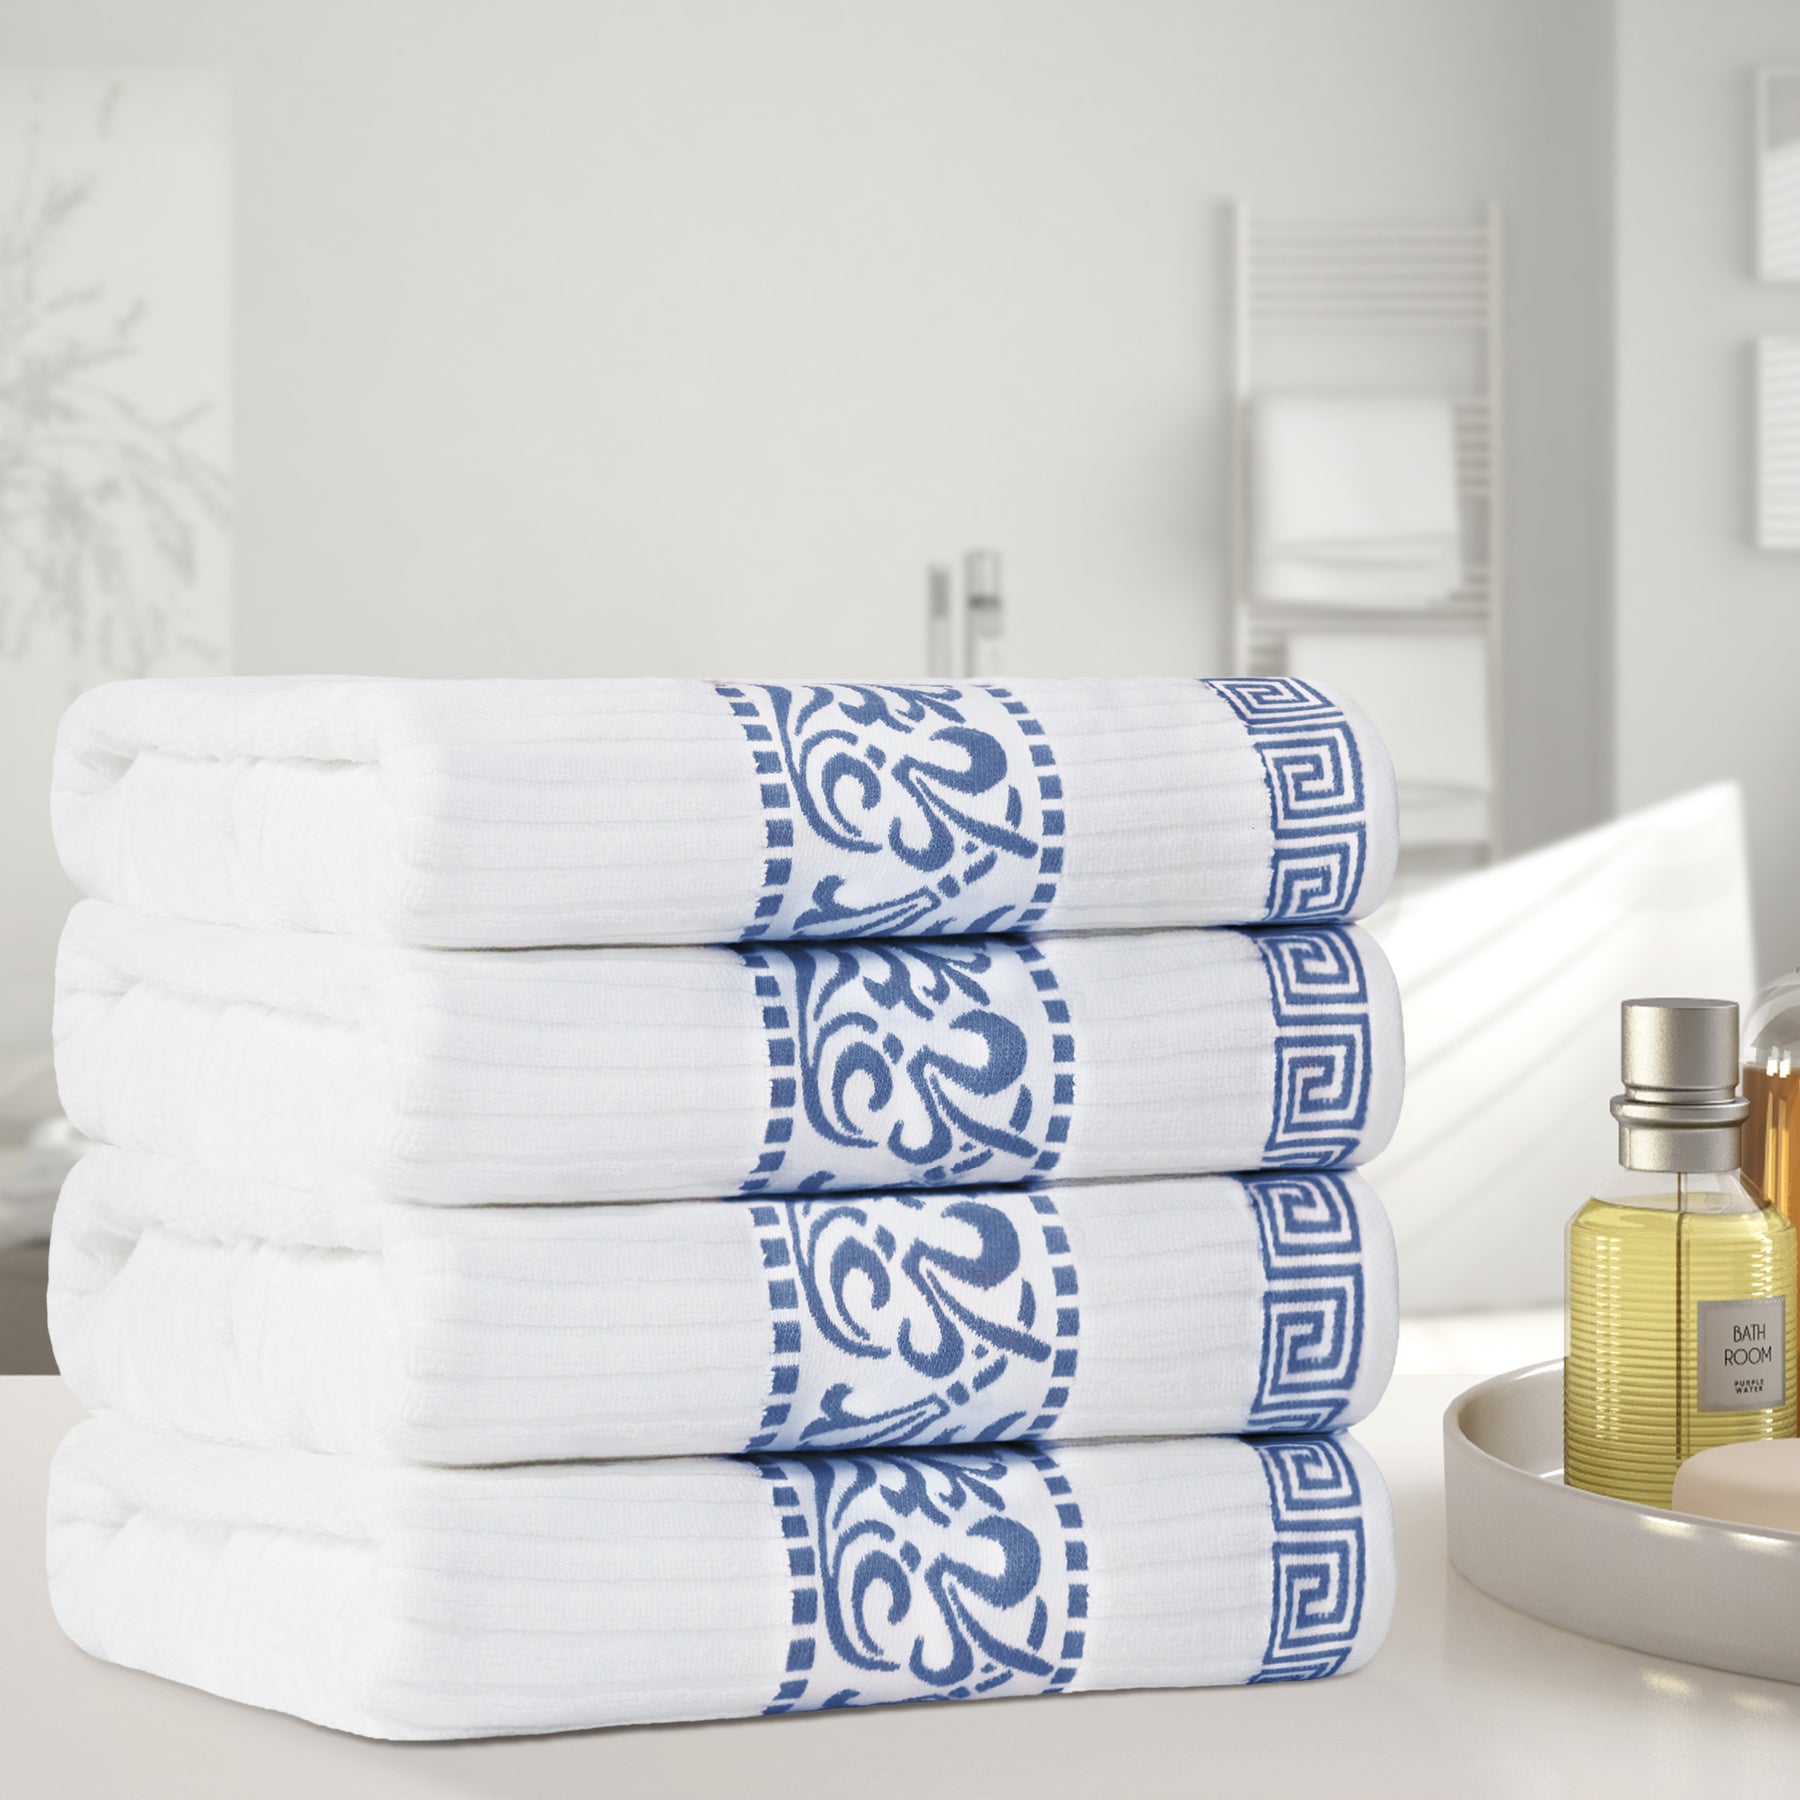 Superior Athens Cotton 4-Piece Bath Towel Set with Greek Scroll and Floral Pattern - Navy Blue